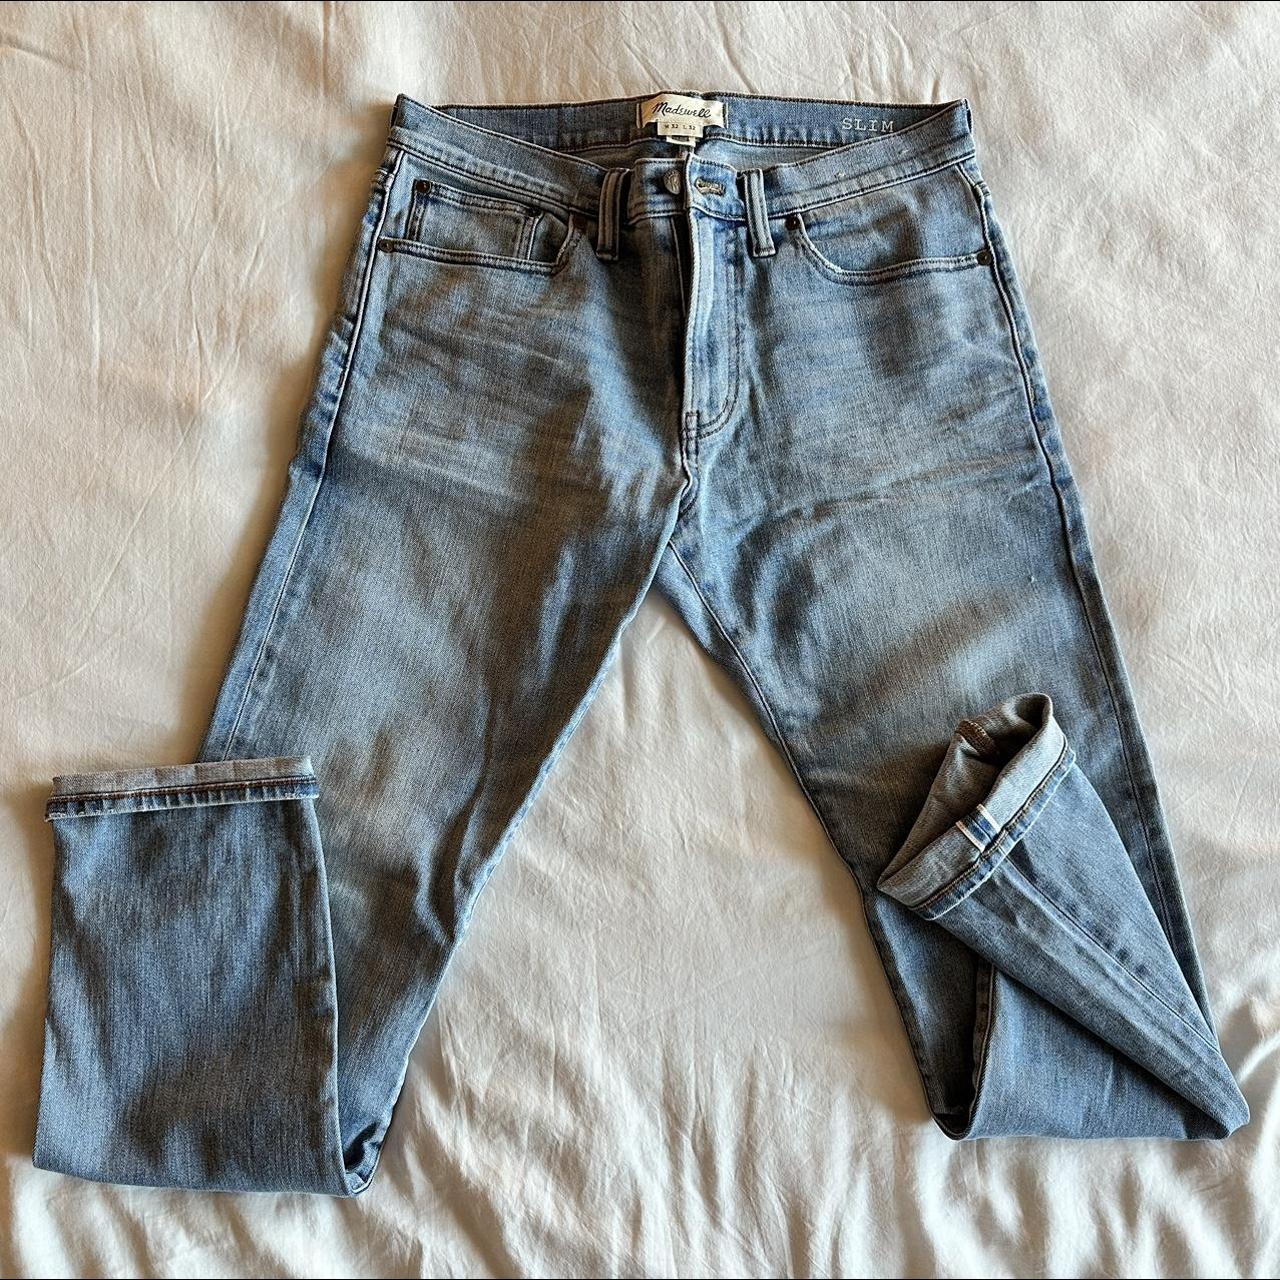 Madewell Slim Selvedge Jeans in Easson Wash size... - Depop